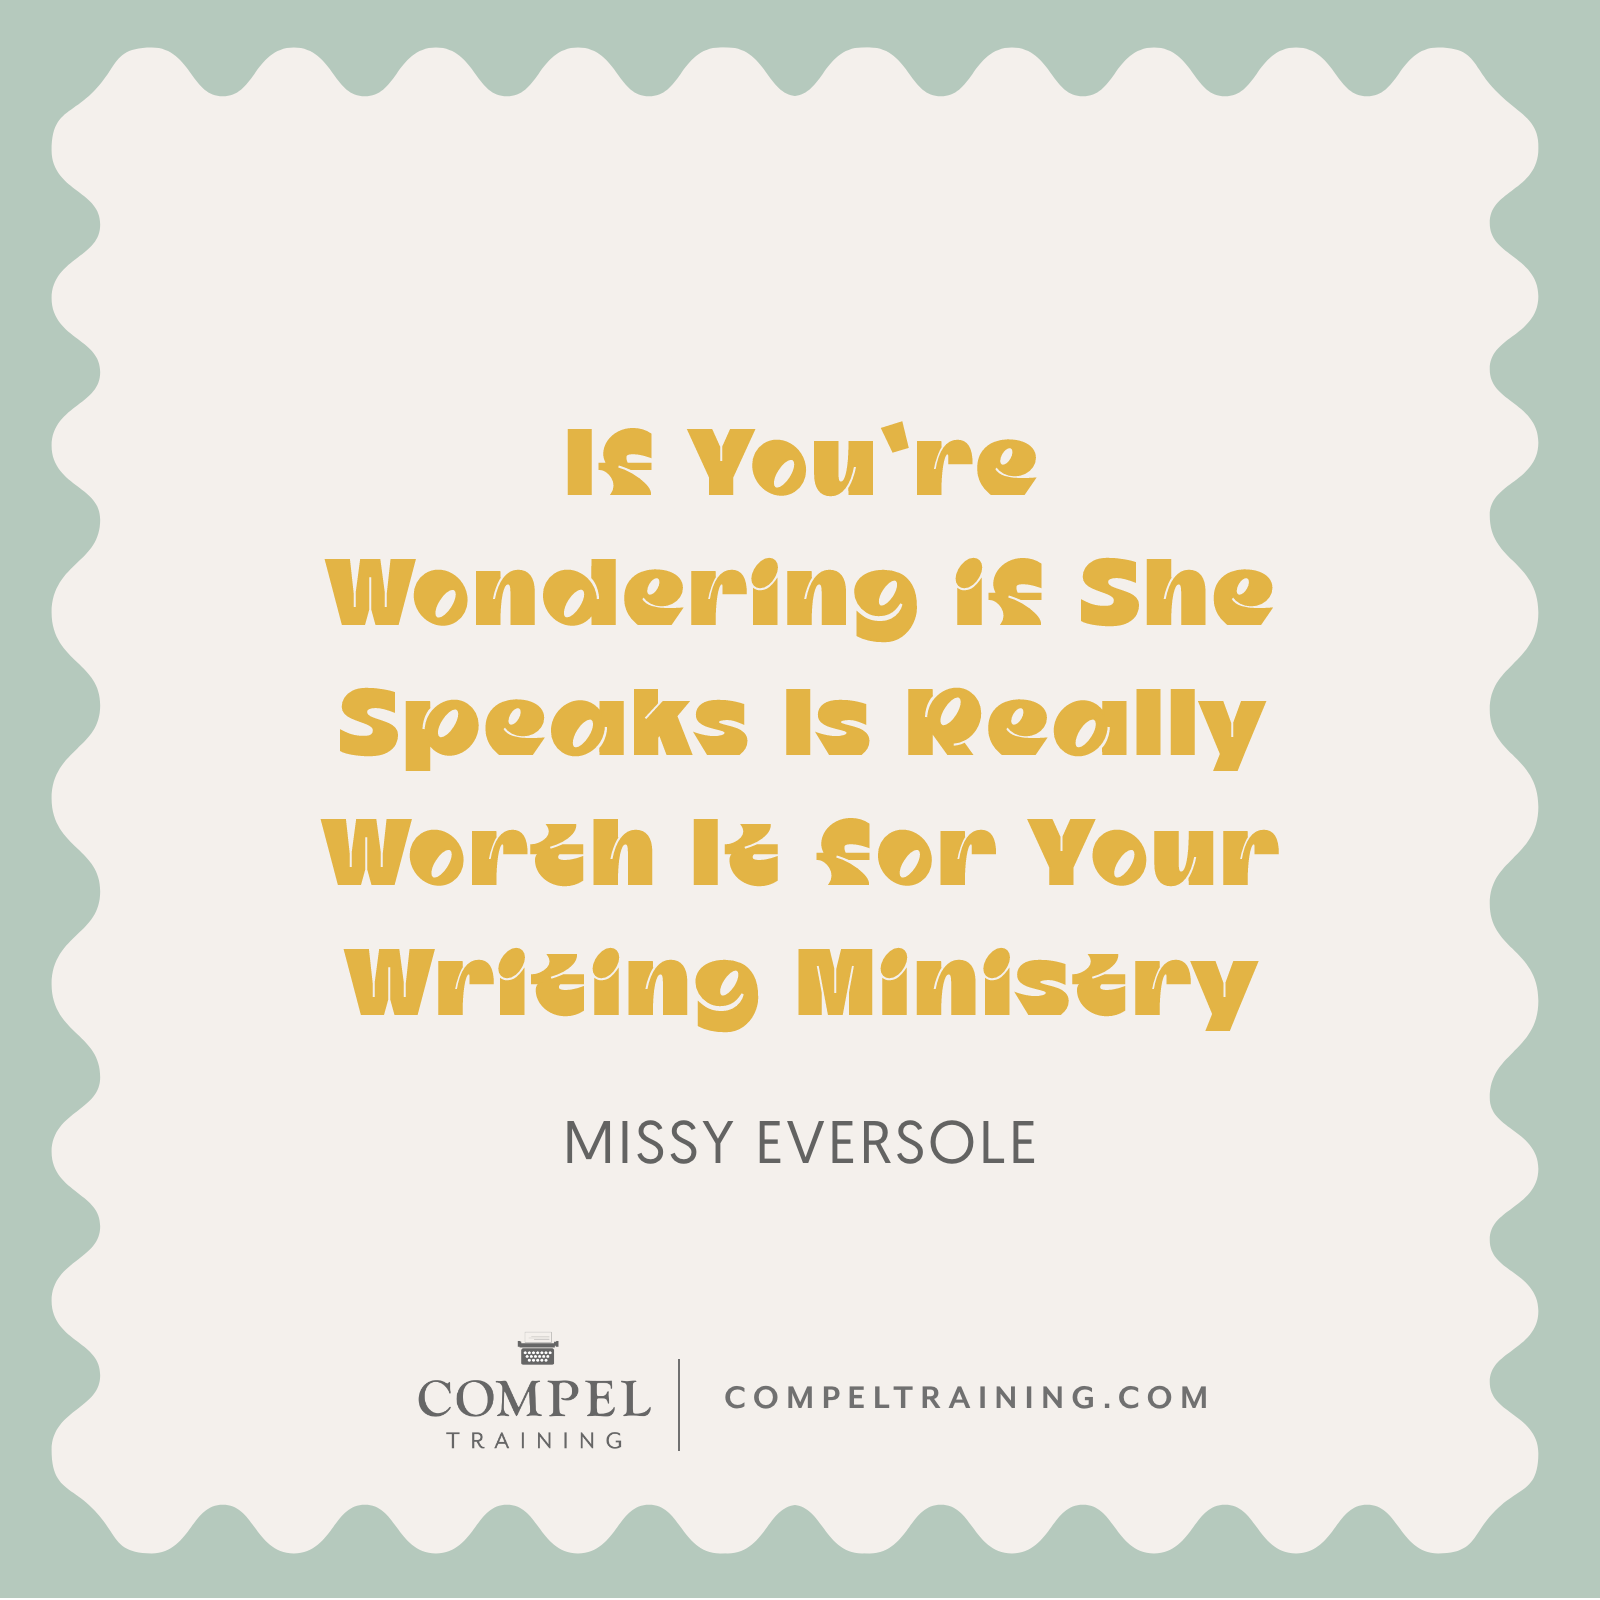 If You’re Wondering if She Speaks Is Really Worth It for Your Writing Ministry